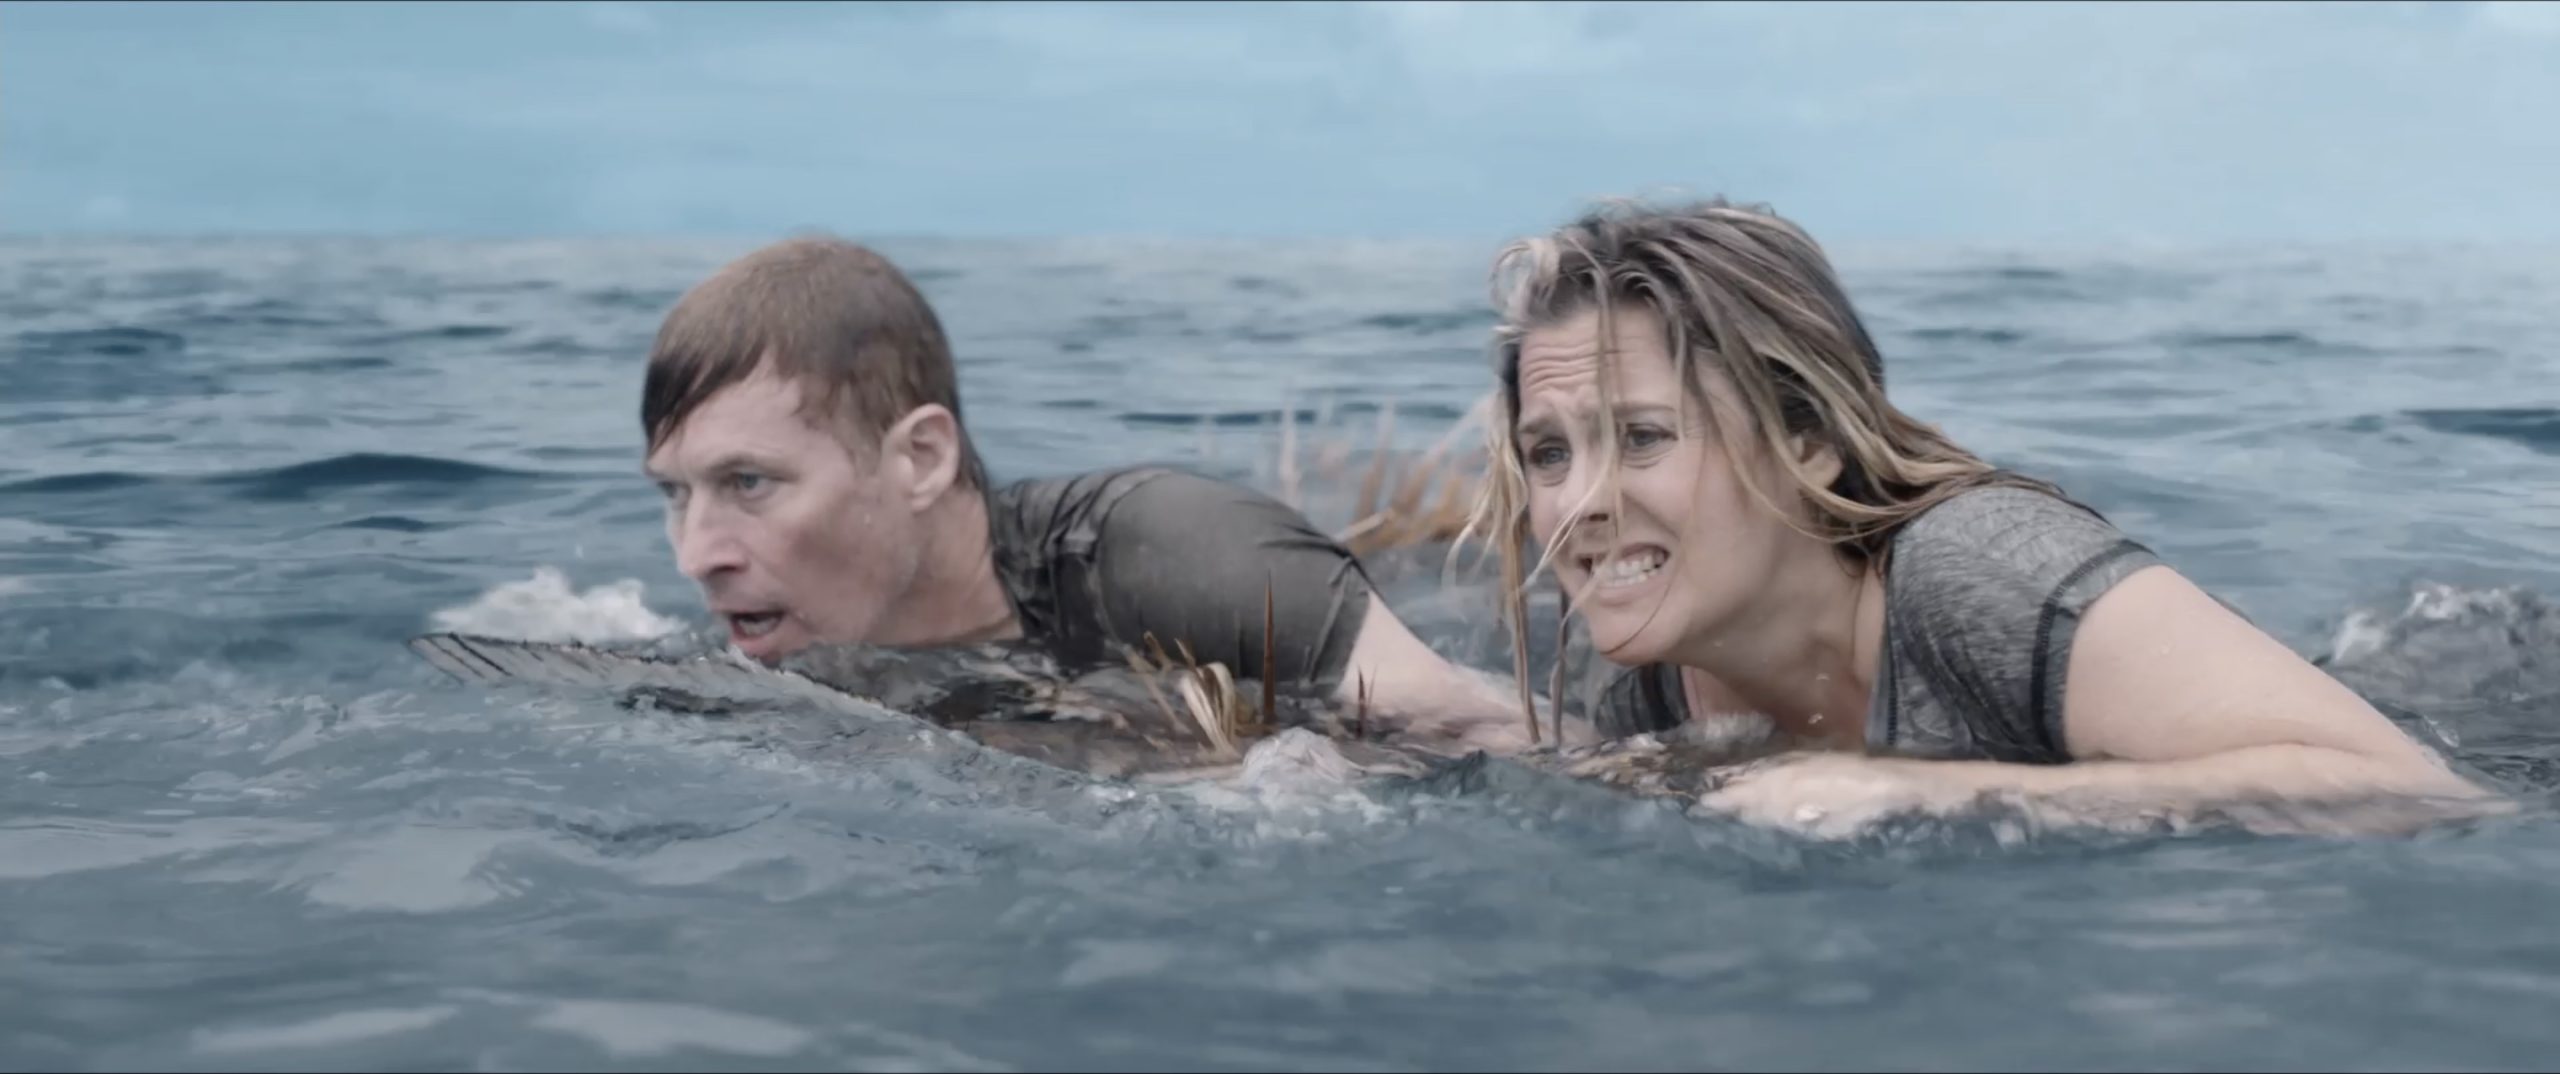 The Requin Trailer Shows Unlucky Couple Swept Out To Sea to Battle Sharks